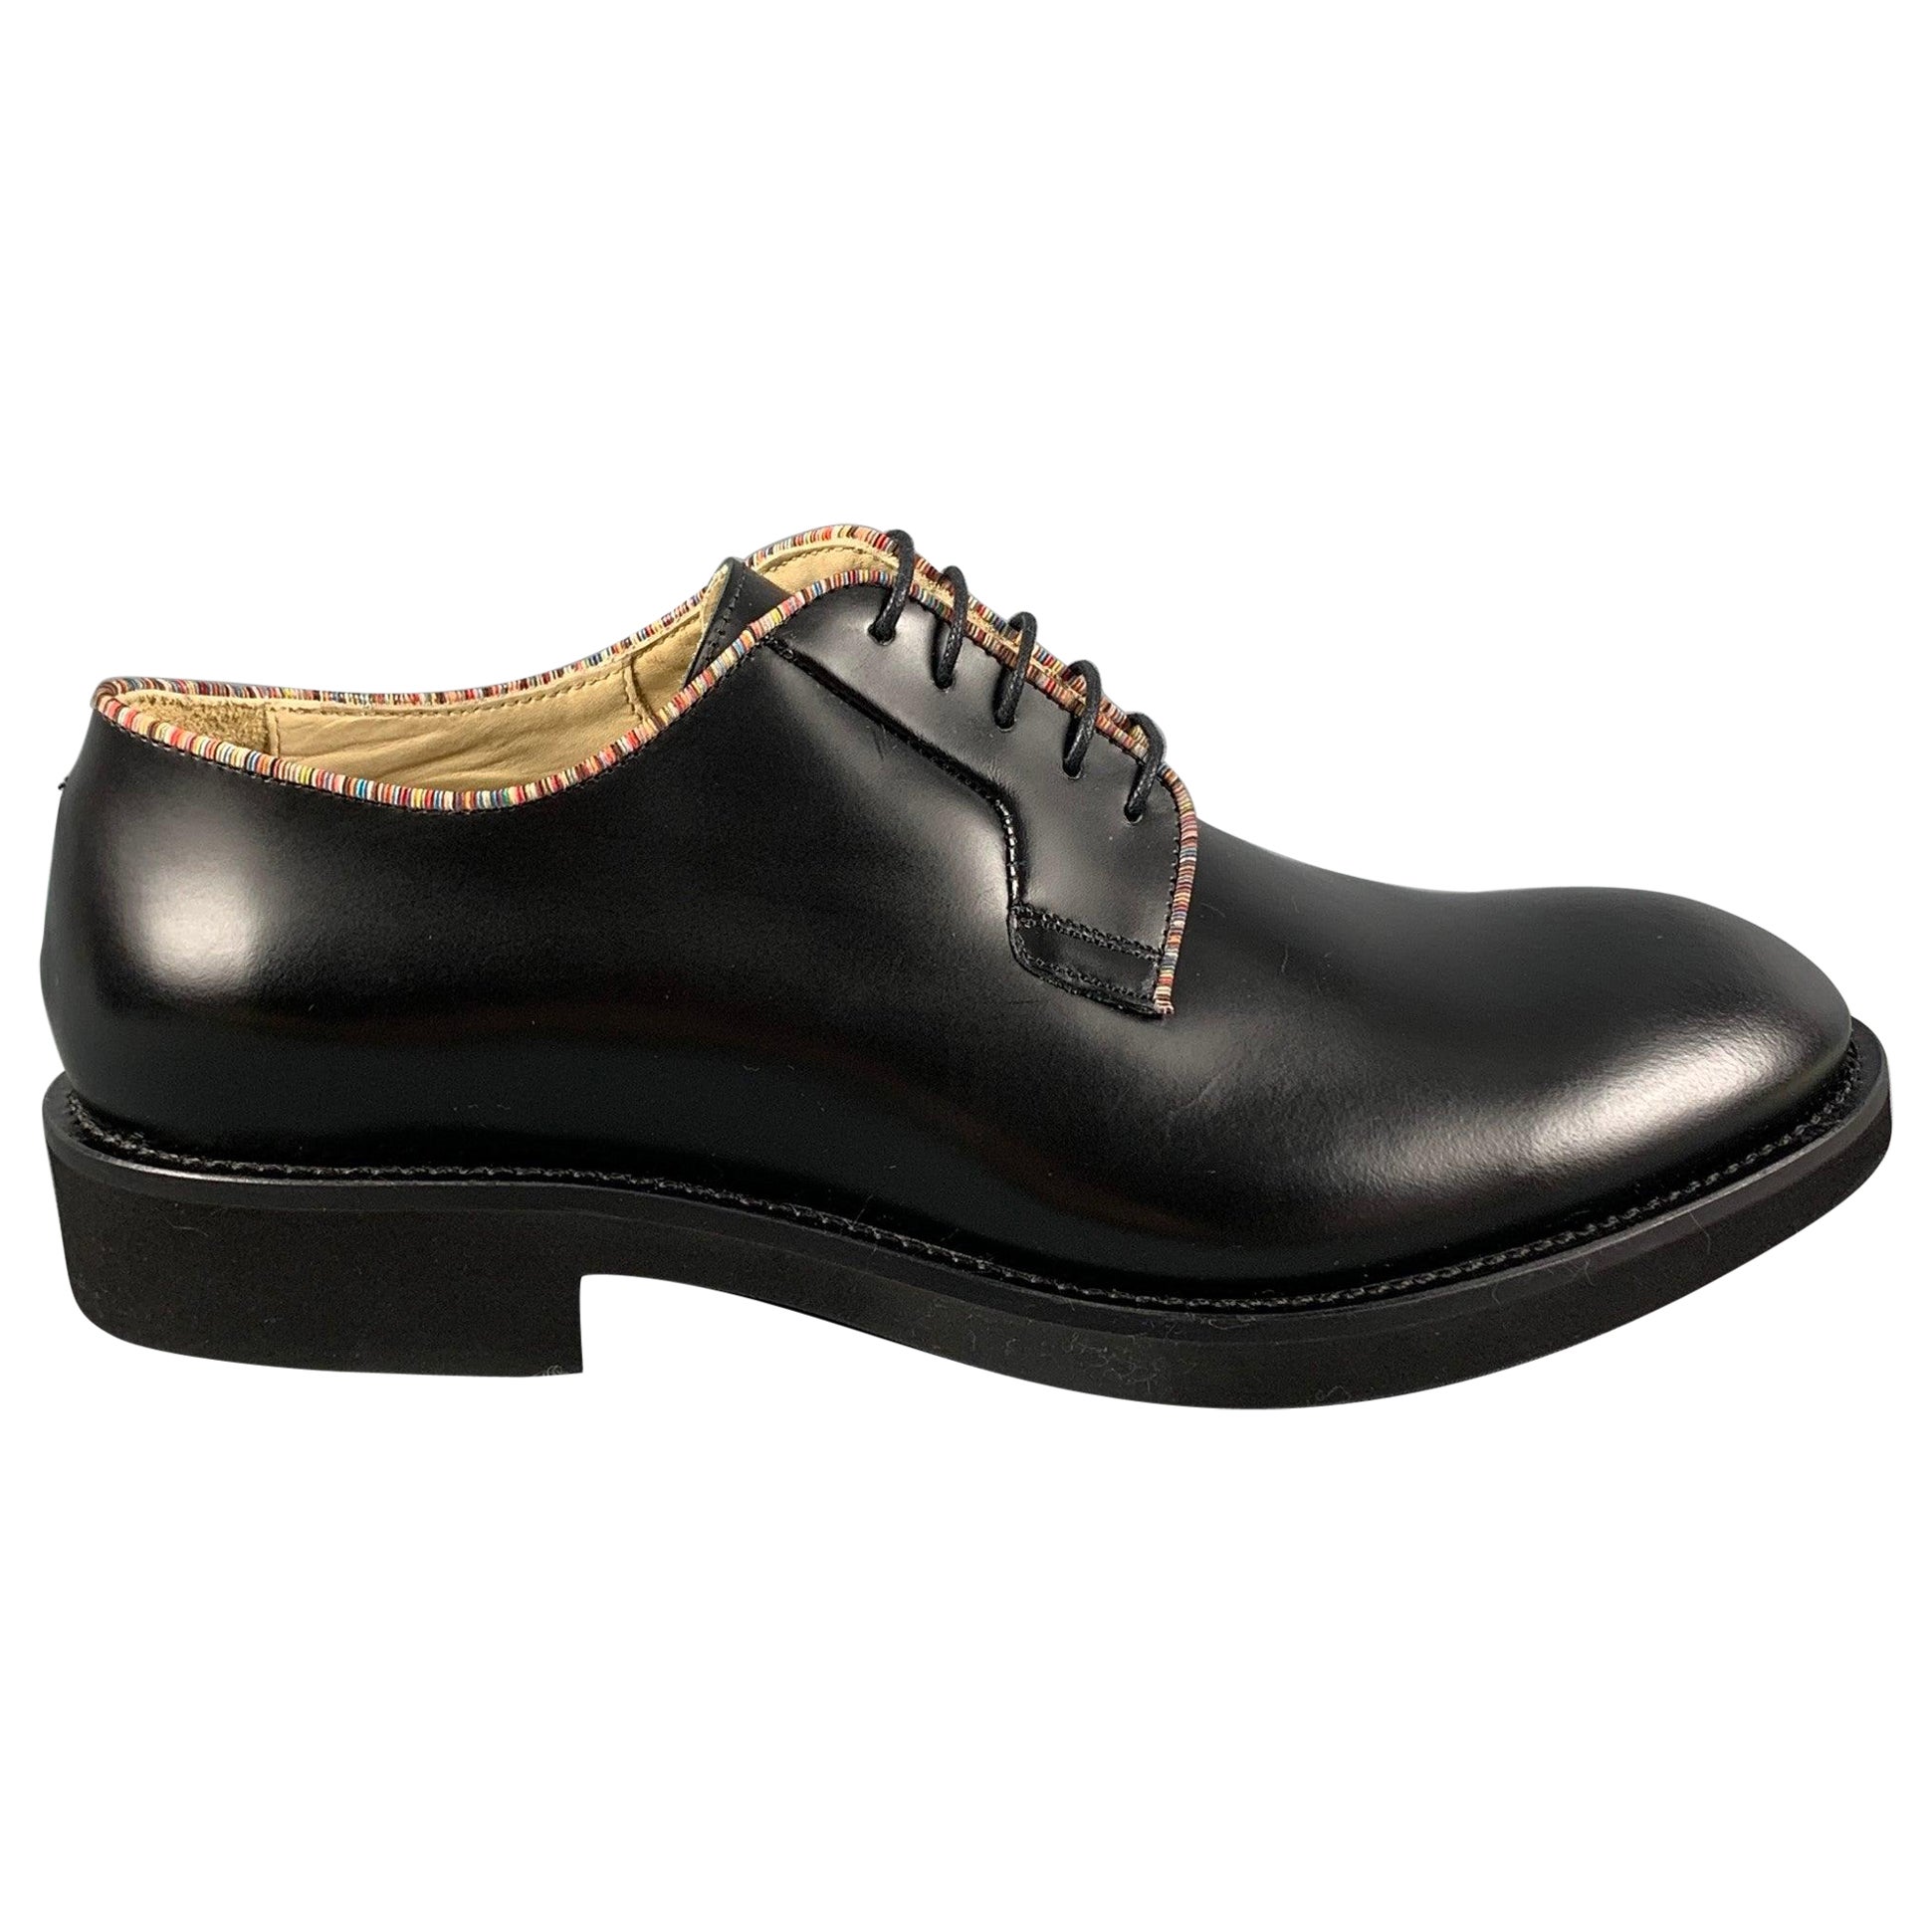 PAUL SMITH Size 11 Black Leather Lace Up Shoes For Sale